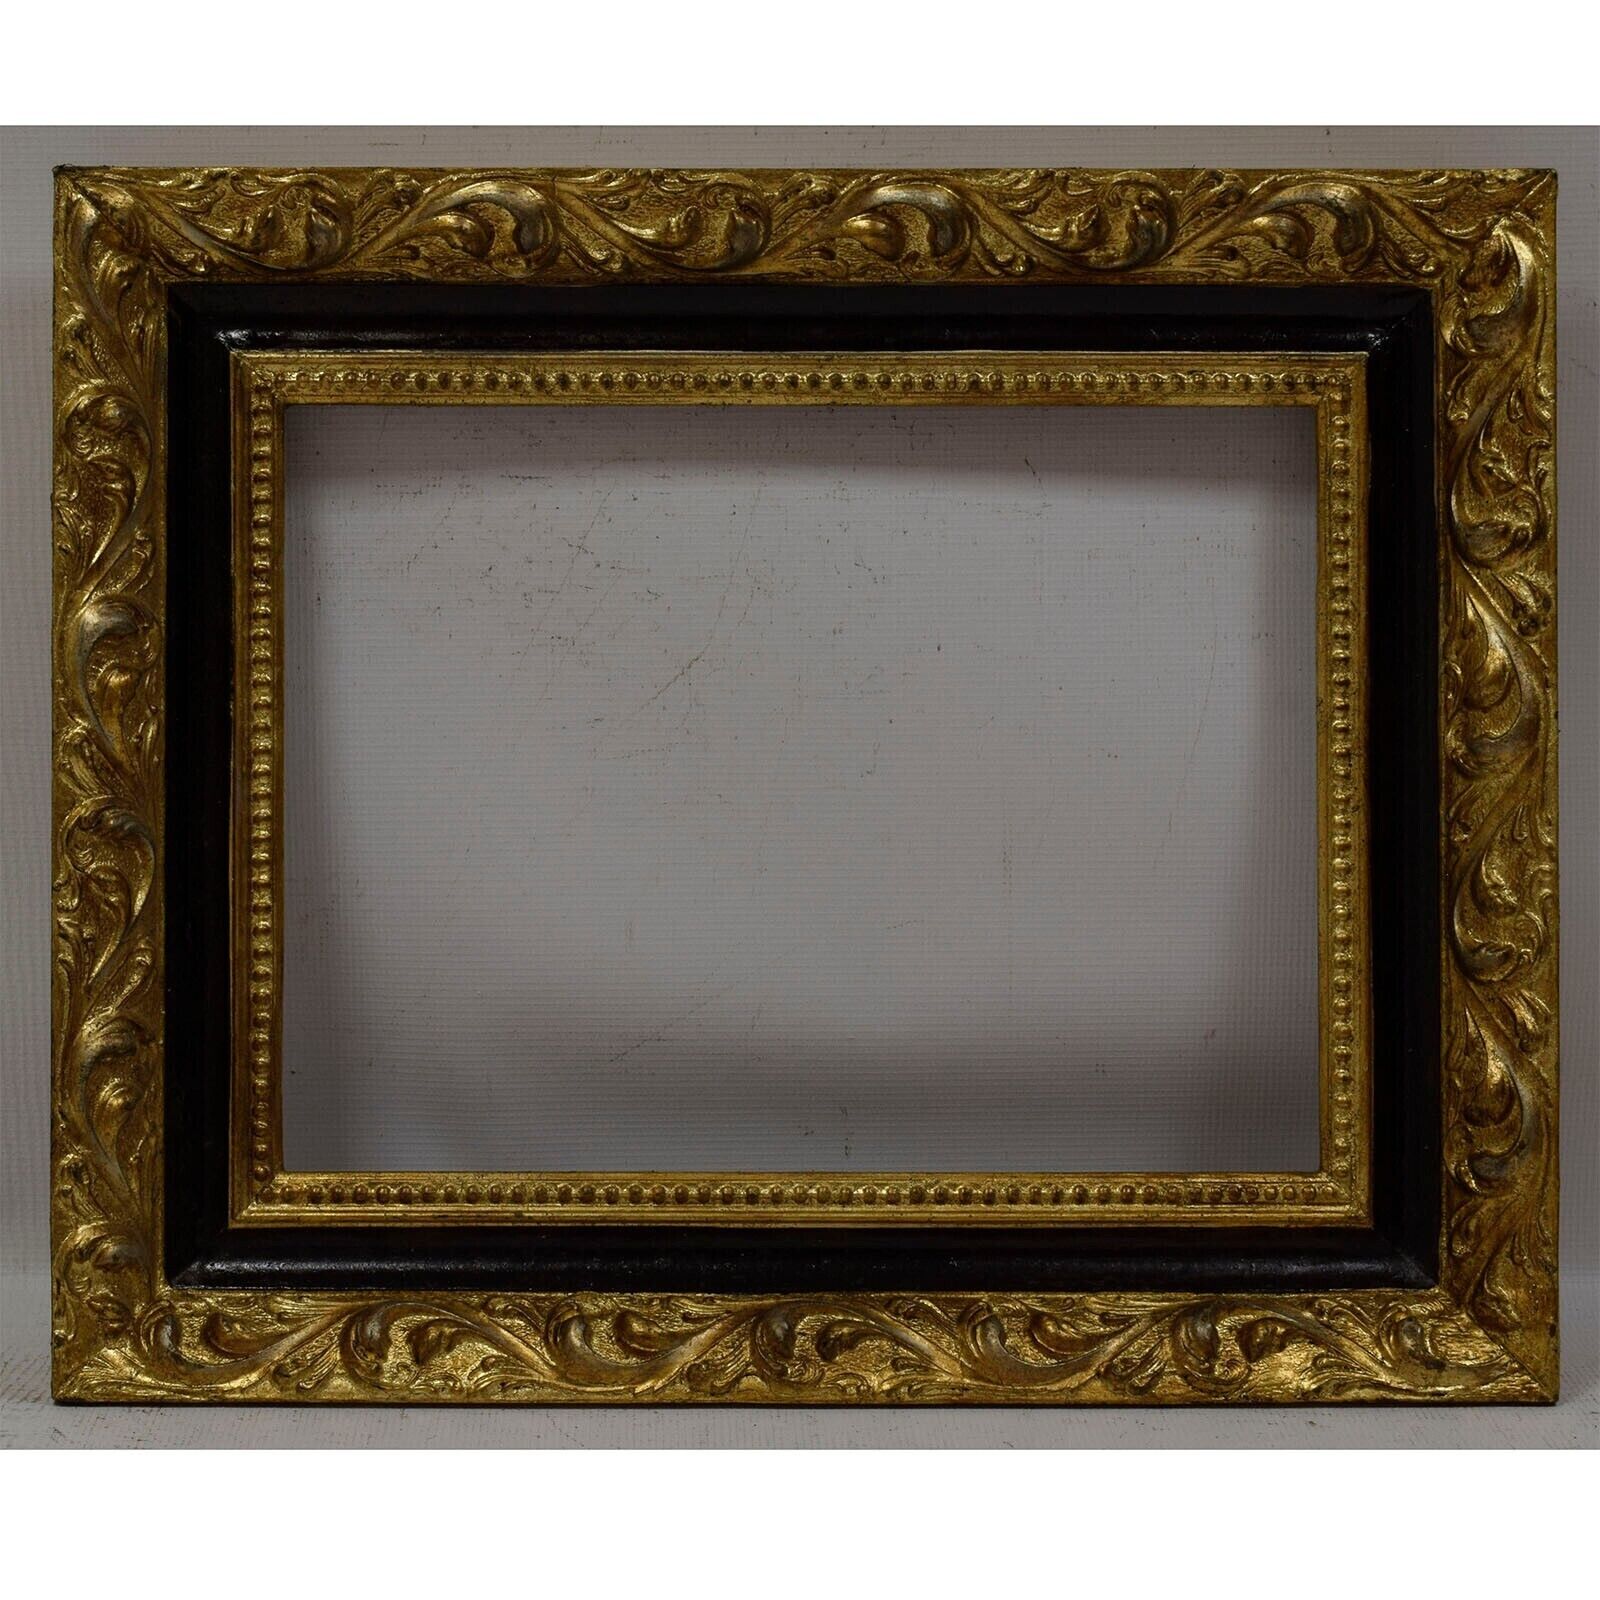 Ca. 1930-1950 Old wooden frame decorative with metal leaf Internal: 16.9x12.5 in